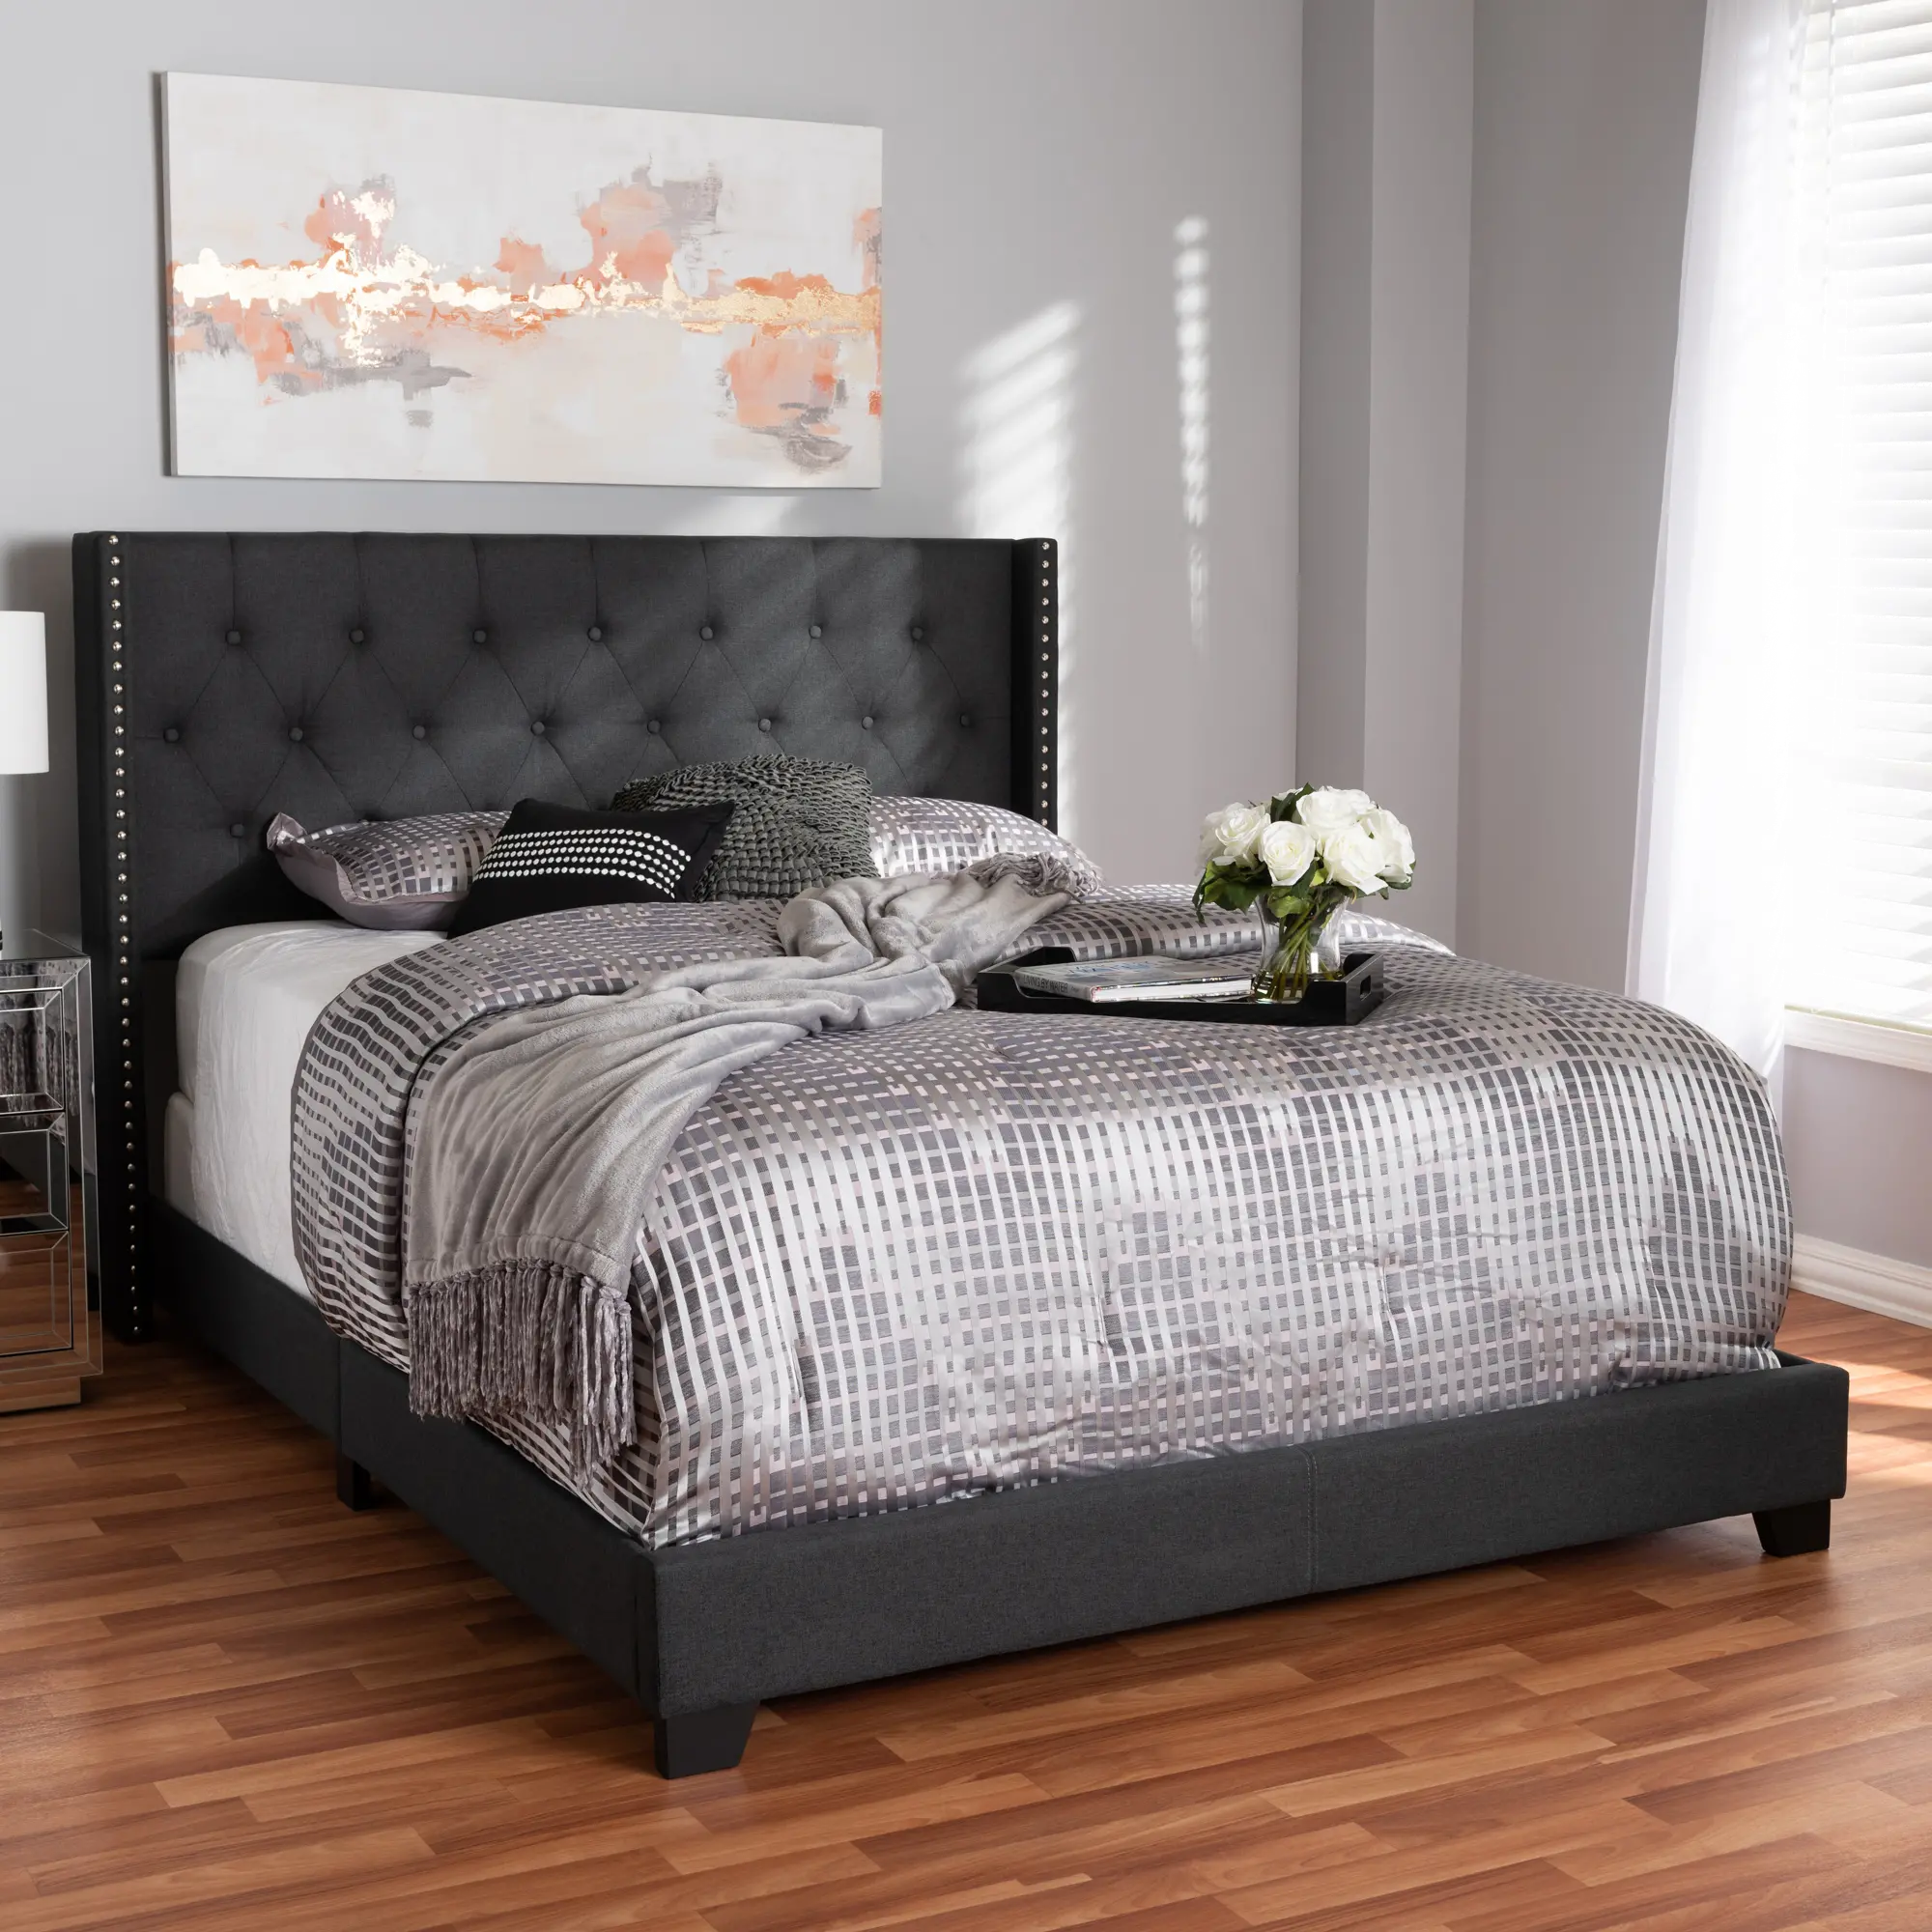 149-8941-RCW Contemporary Charcoal Upholstered Full Bed - Westl sku 149-8941-RCW